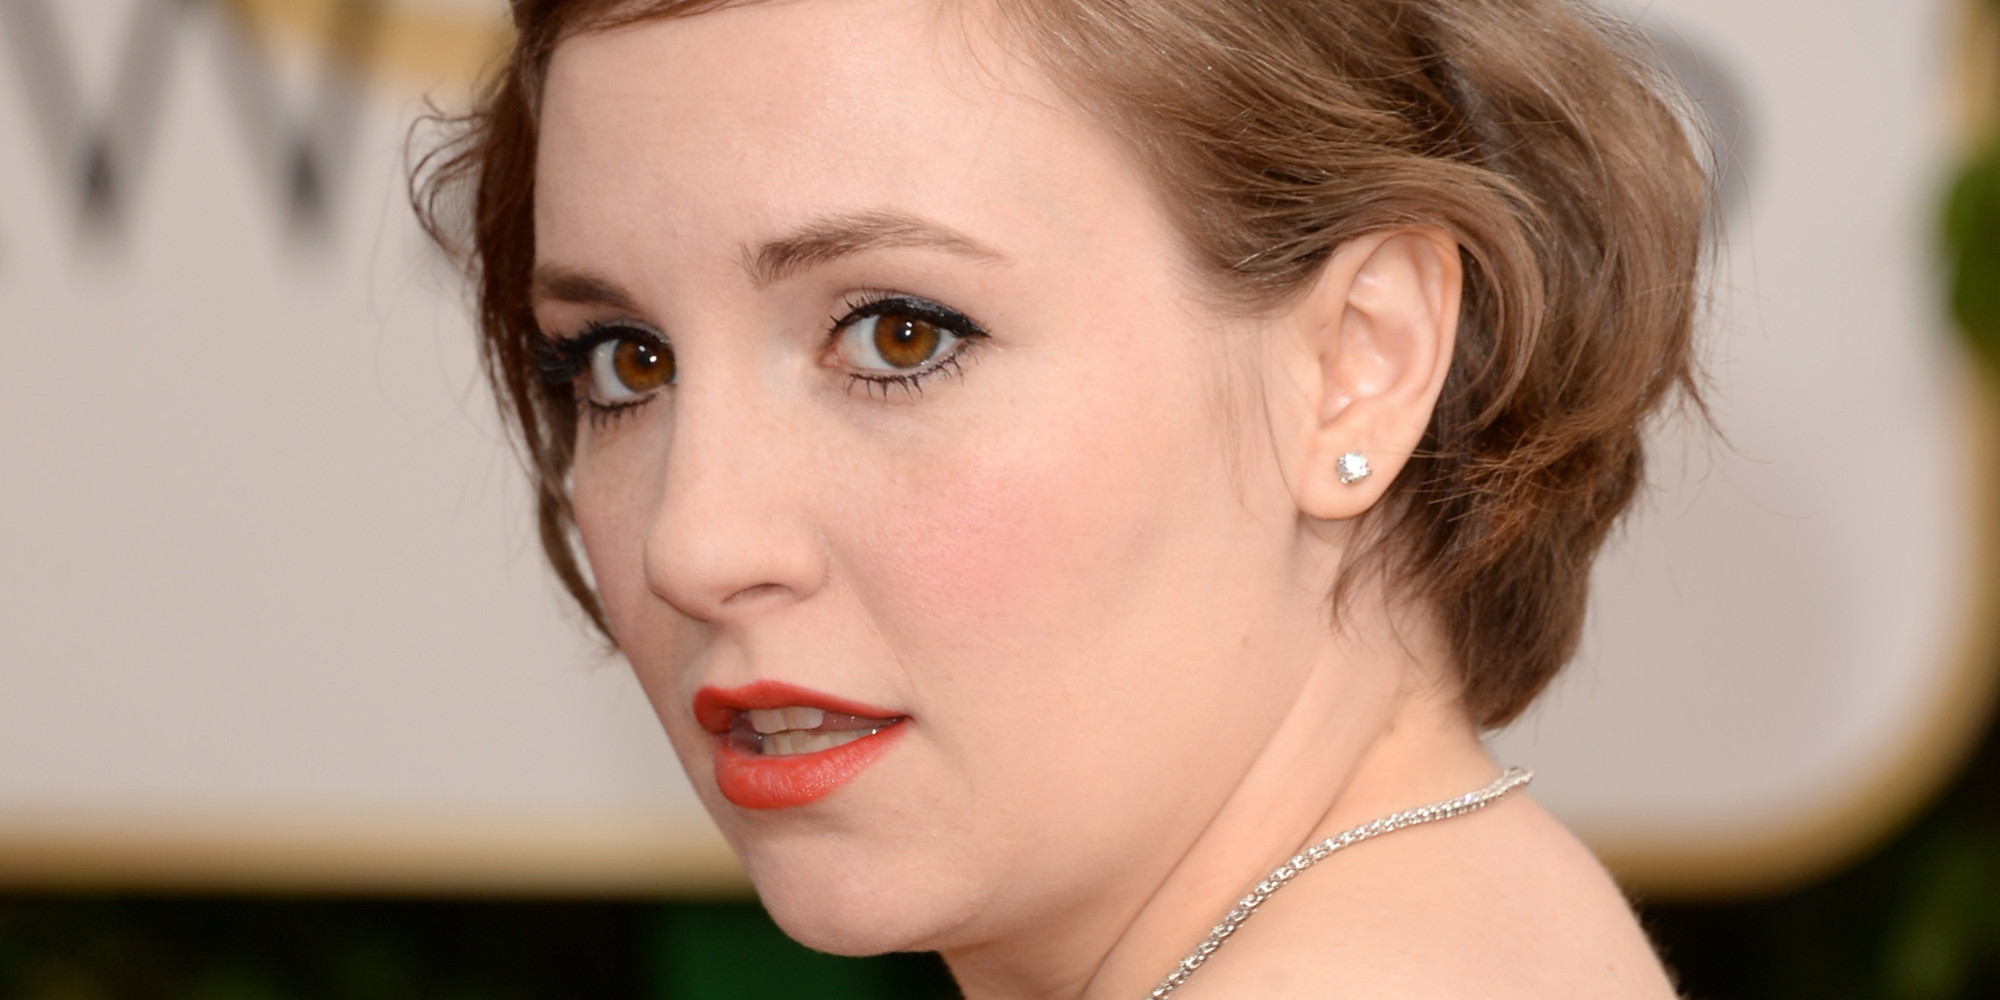 10. Lena Dunham's Blonde Hair: The Inspiration Behind Her Bold Change - wide 1